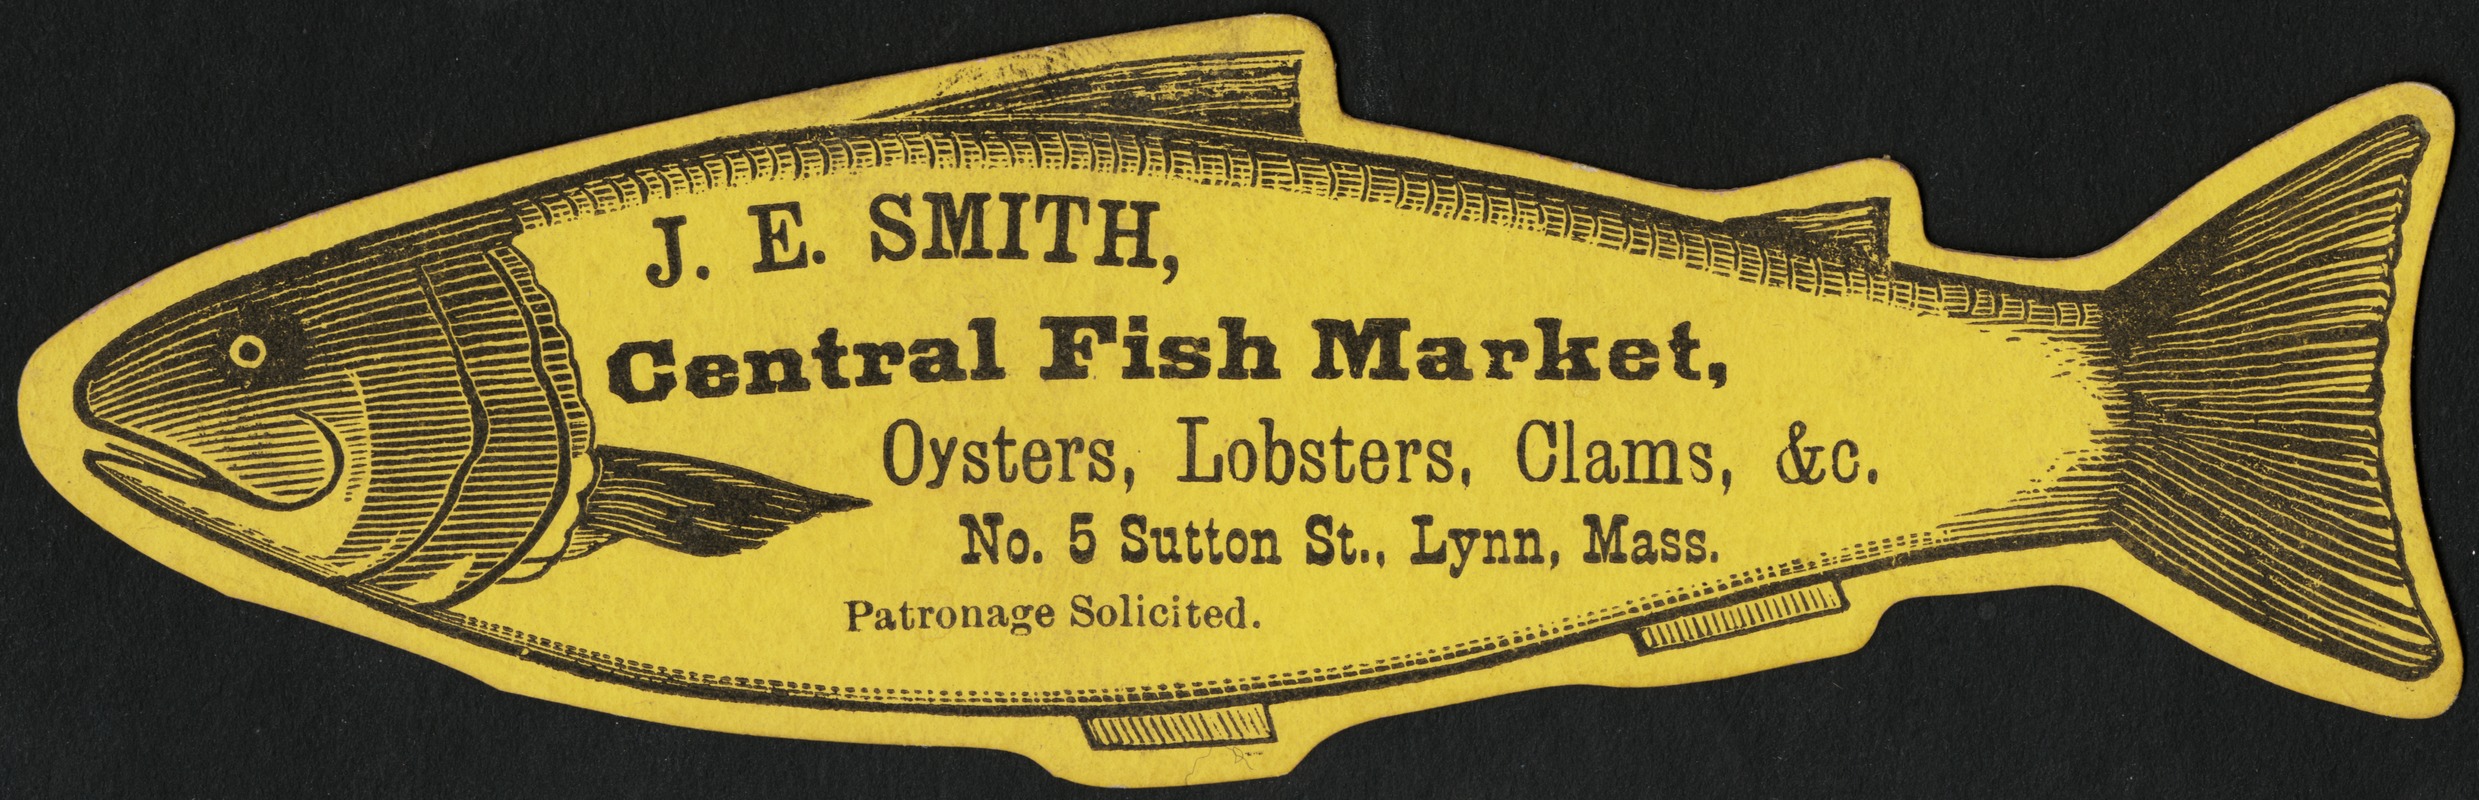 J. E. Smith, Central Fish Market, oysters, lobsters, clams, &c. No. 5 Sutton St., Lynn, Mass.